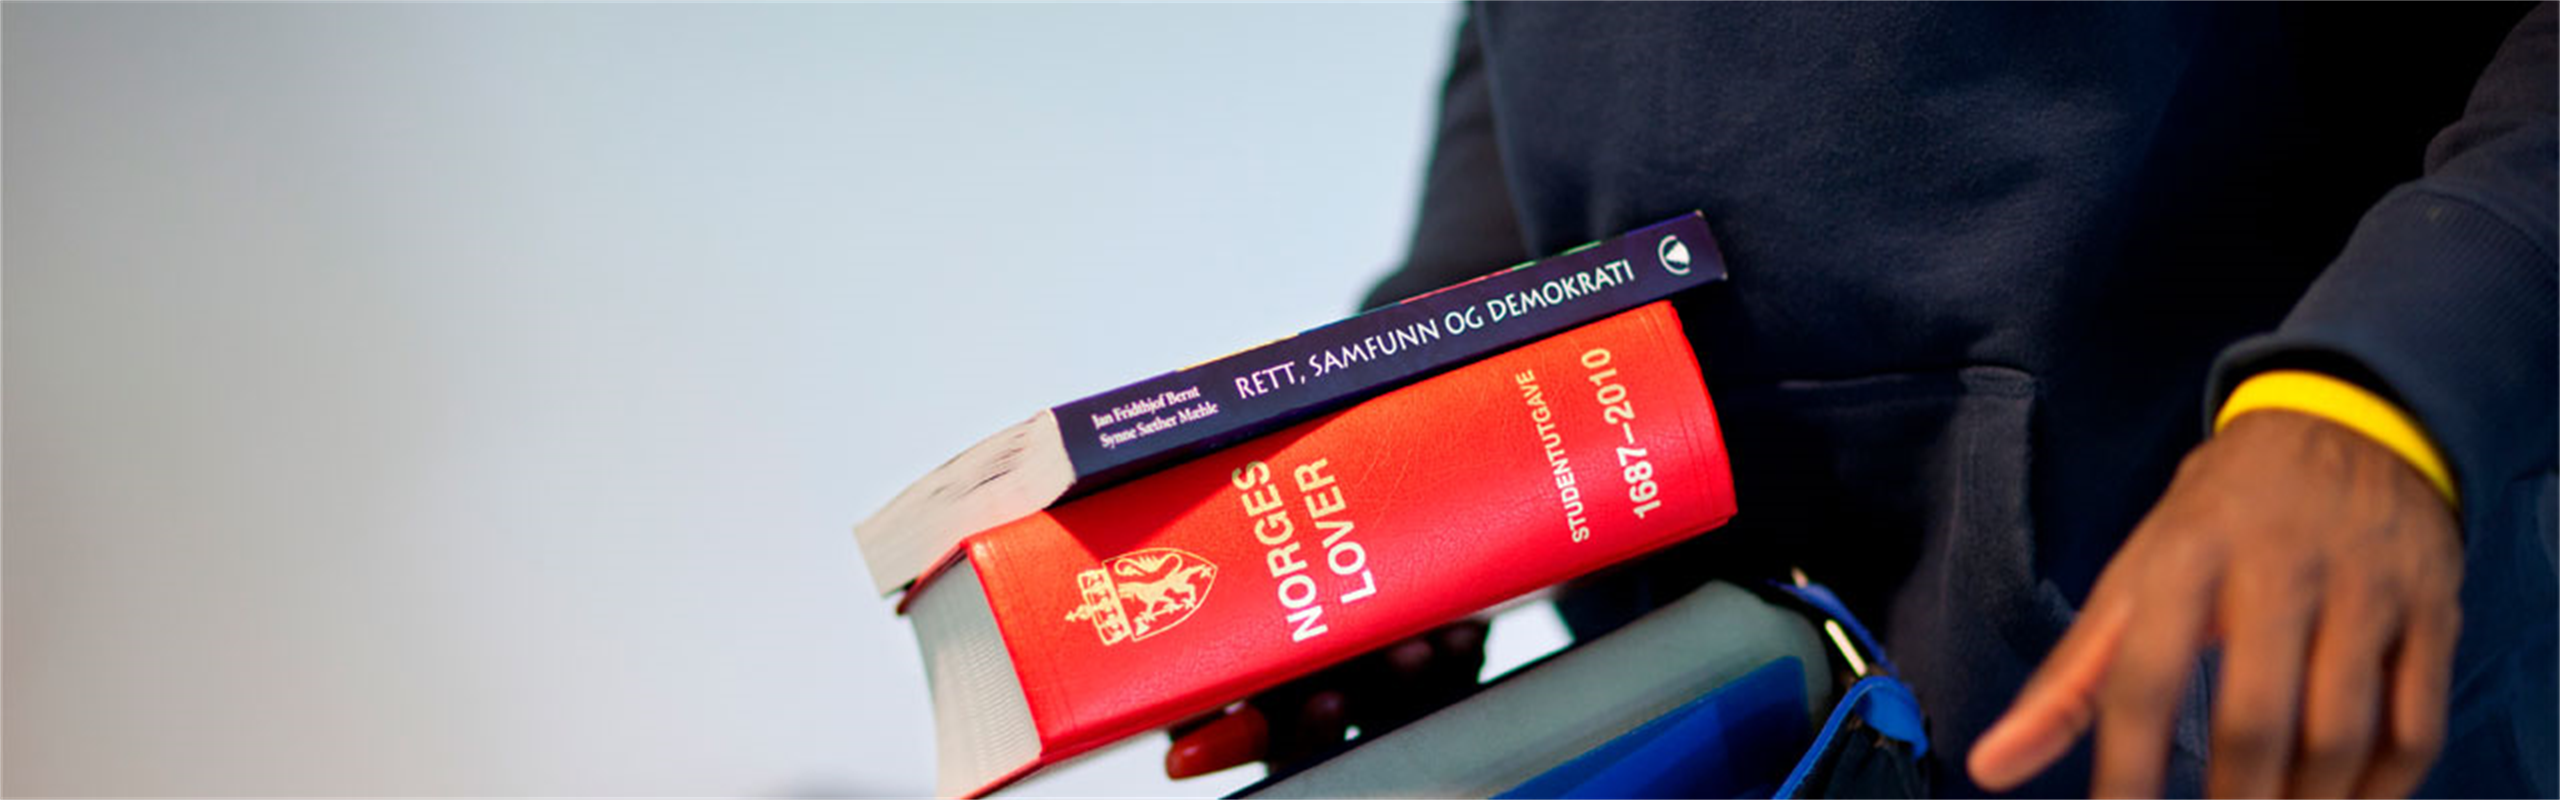 Books about Norwegian laws and law, society and democracy